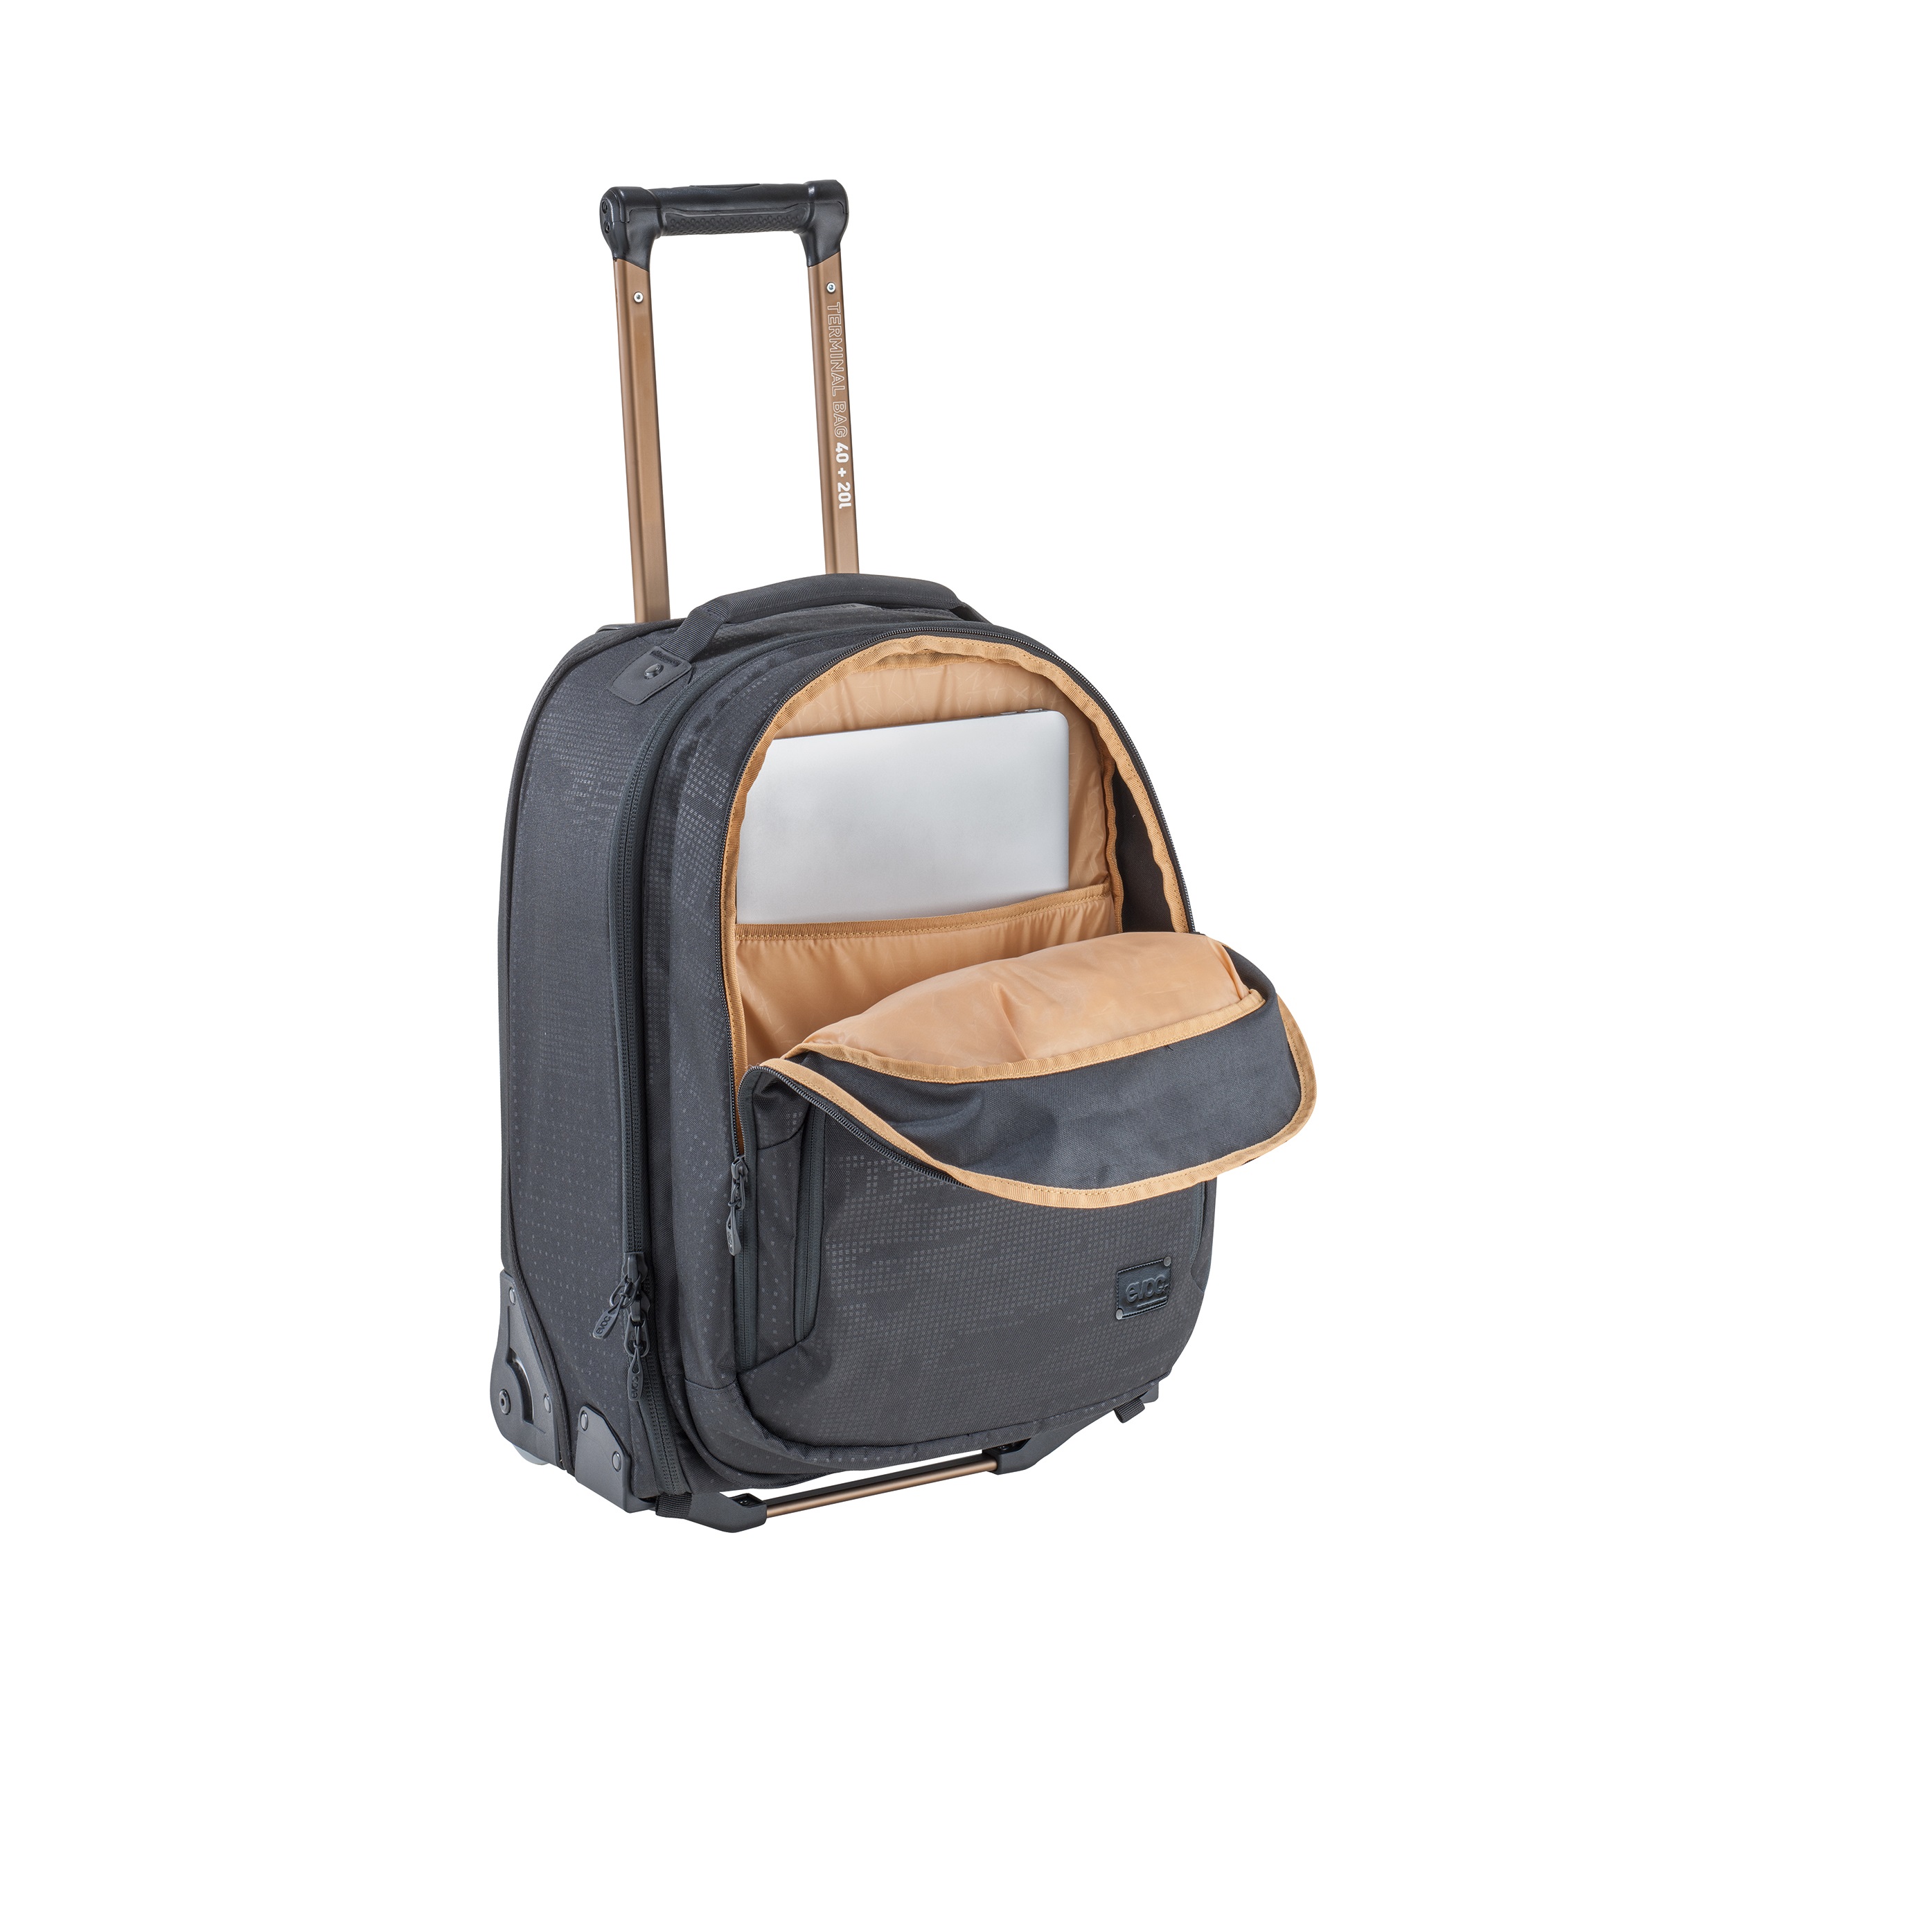 BLEU (Expandable) 3 Way Carry 541 Duffle Trolley Travel Luggage Bag with  Wheels Duffel With Wheels (Strolley) Multicolor - Price in India |  Flipkart.com